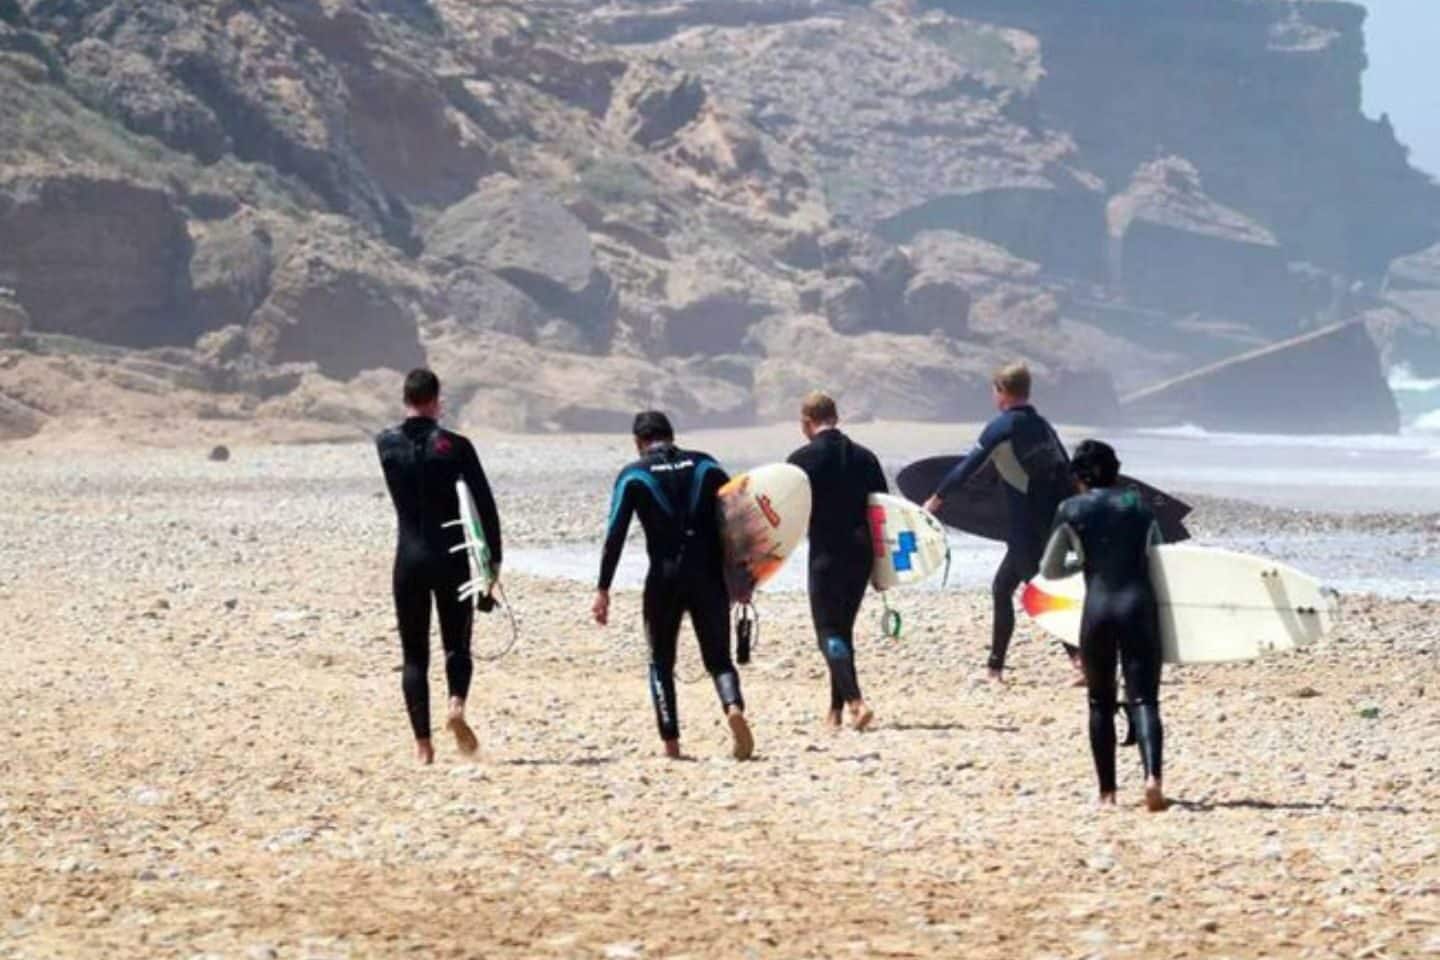 Group of surfers walking on the sand